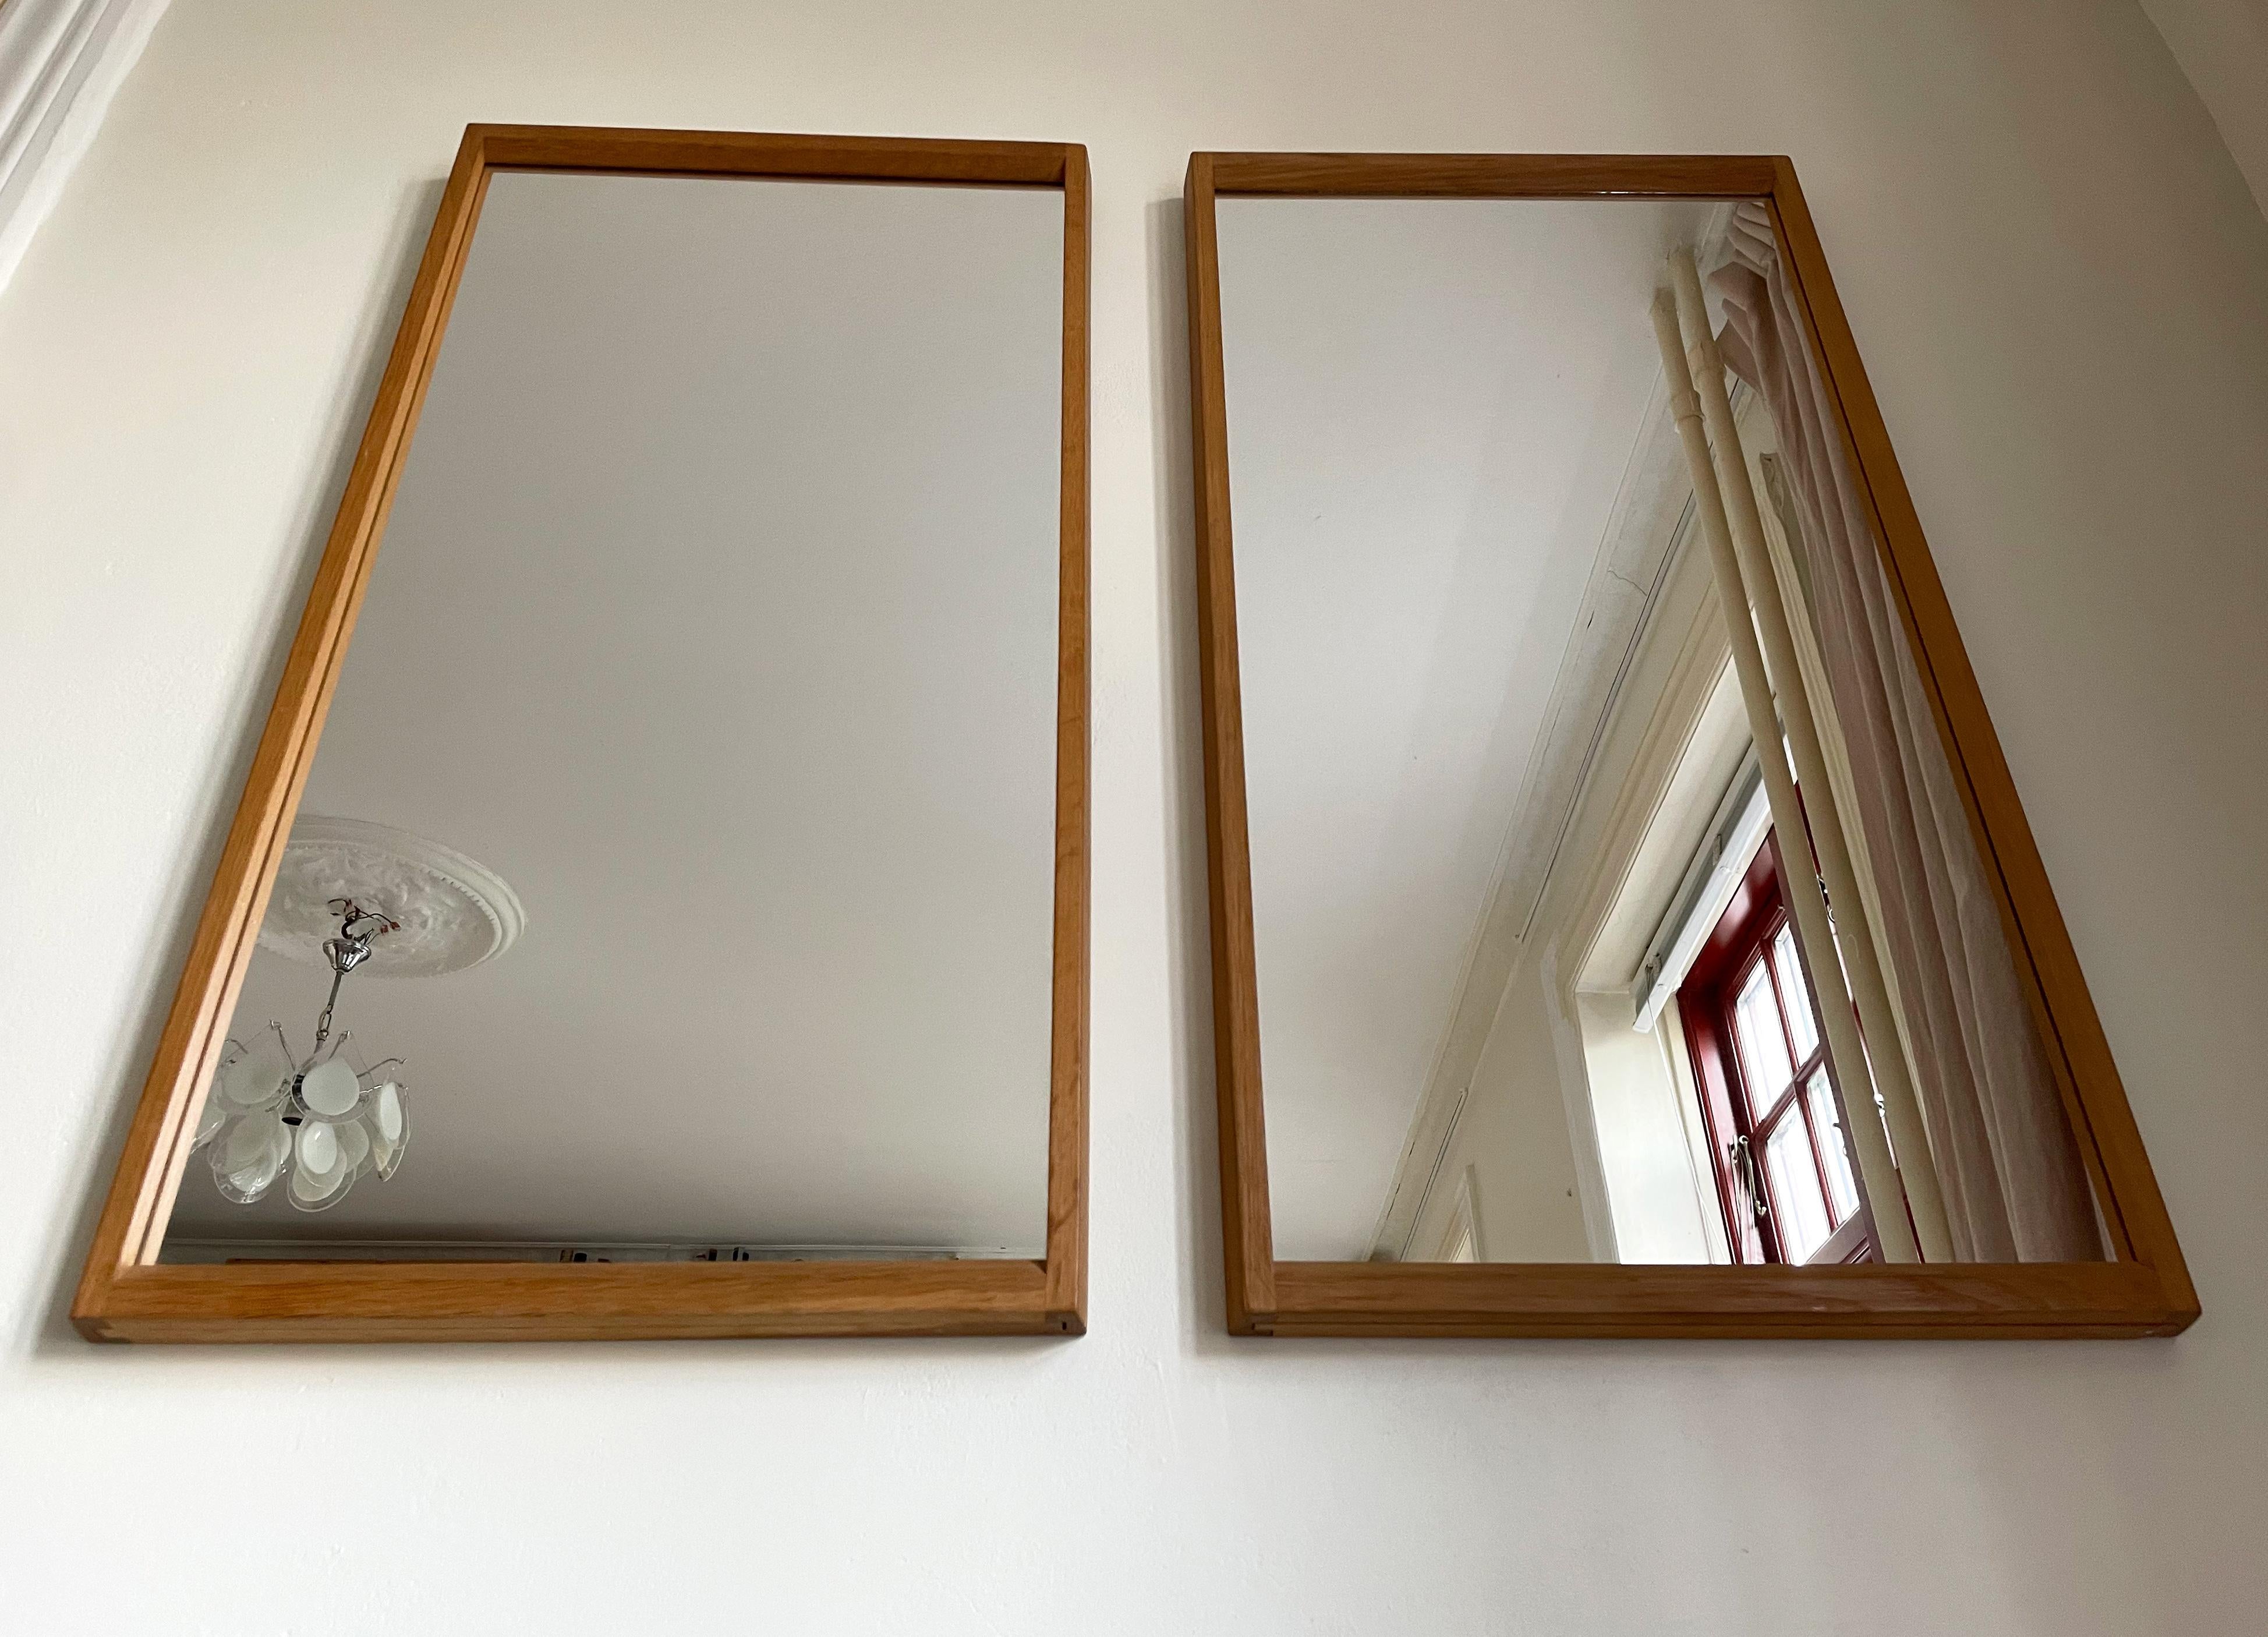 Rare set of two classic, simple Danish modernist mirrors of the model no. 143 that have stayed together since production in the early 1960s, thus same color and patina to the wood. Elegantly profiled rectangular oak frame with beautiful finger